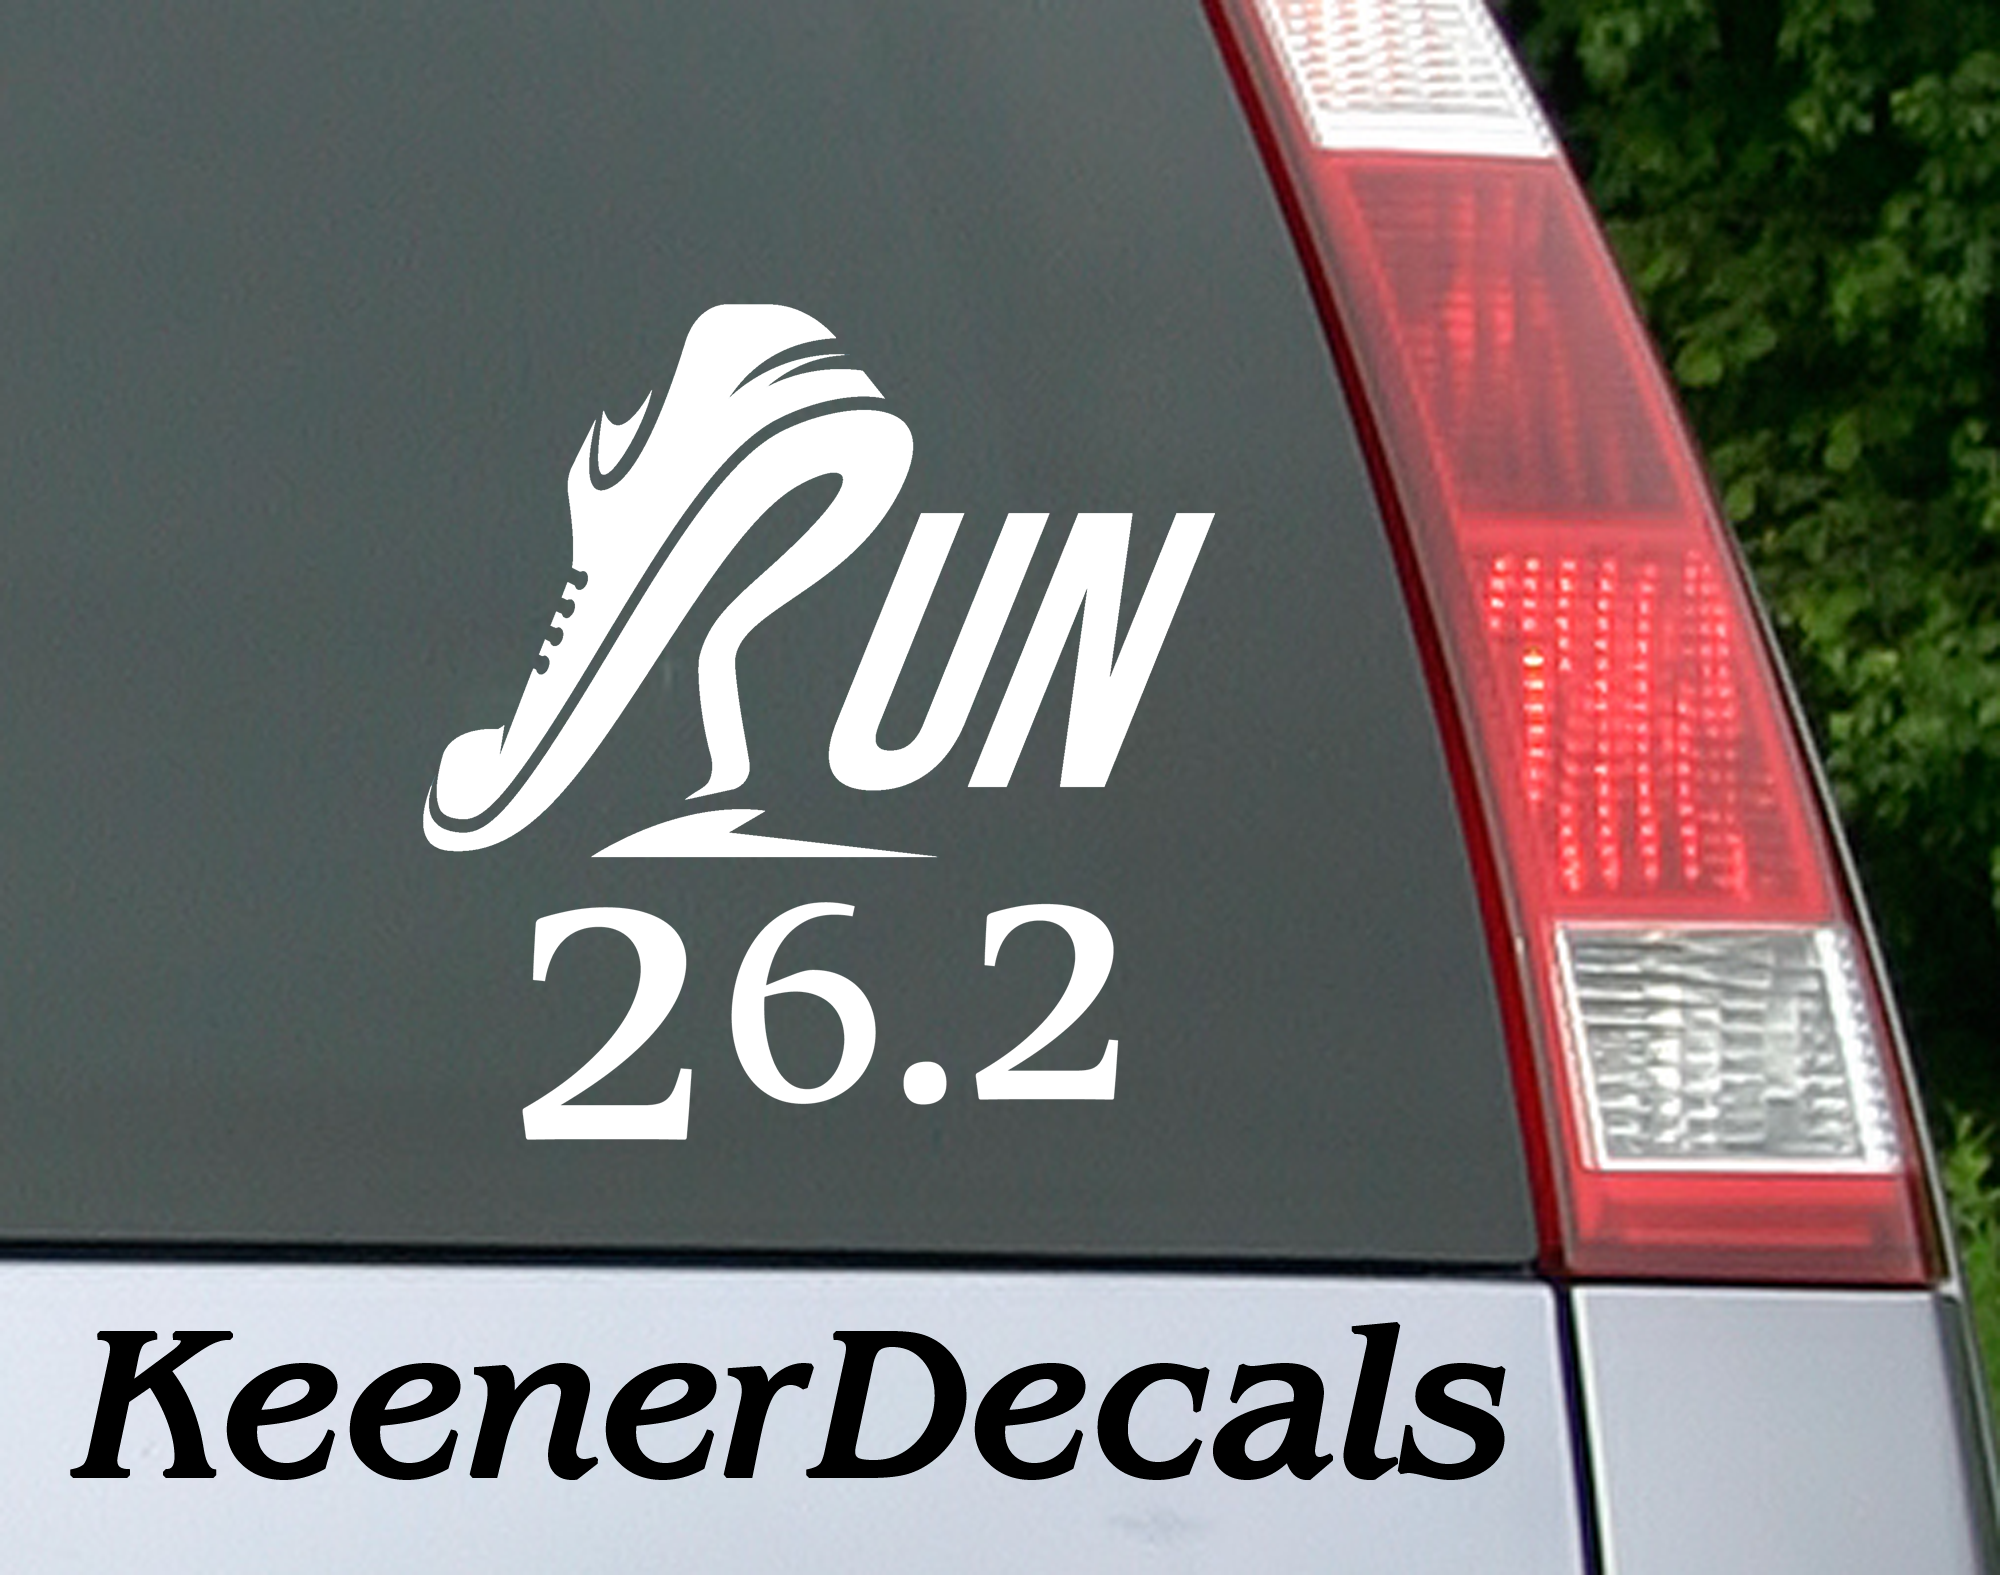 Marathon 26.2 miles or 42.2kms. Display your trophy on your car, you've earned it.  5.5"W x 5.8"H Car Decal, Car Sticker, Car Vinyl, Bumper Sticker, Vinyl Stickers, Vinyl Sticker.  FREE SHIPPING FOR ALL VINYL DECALS within Canada and the US.